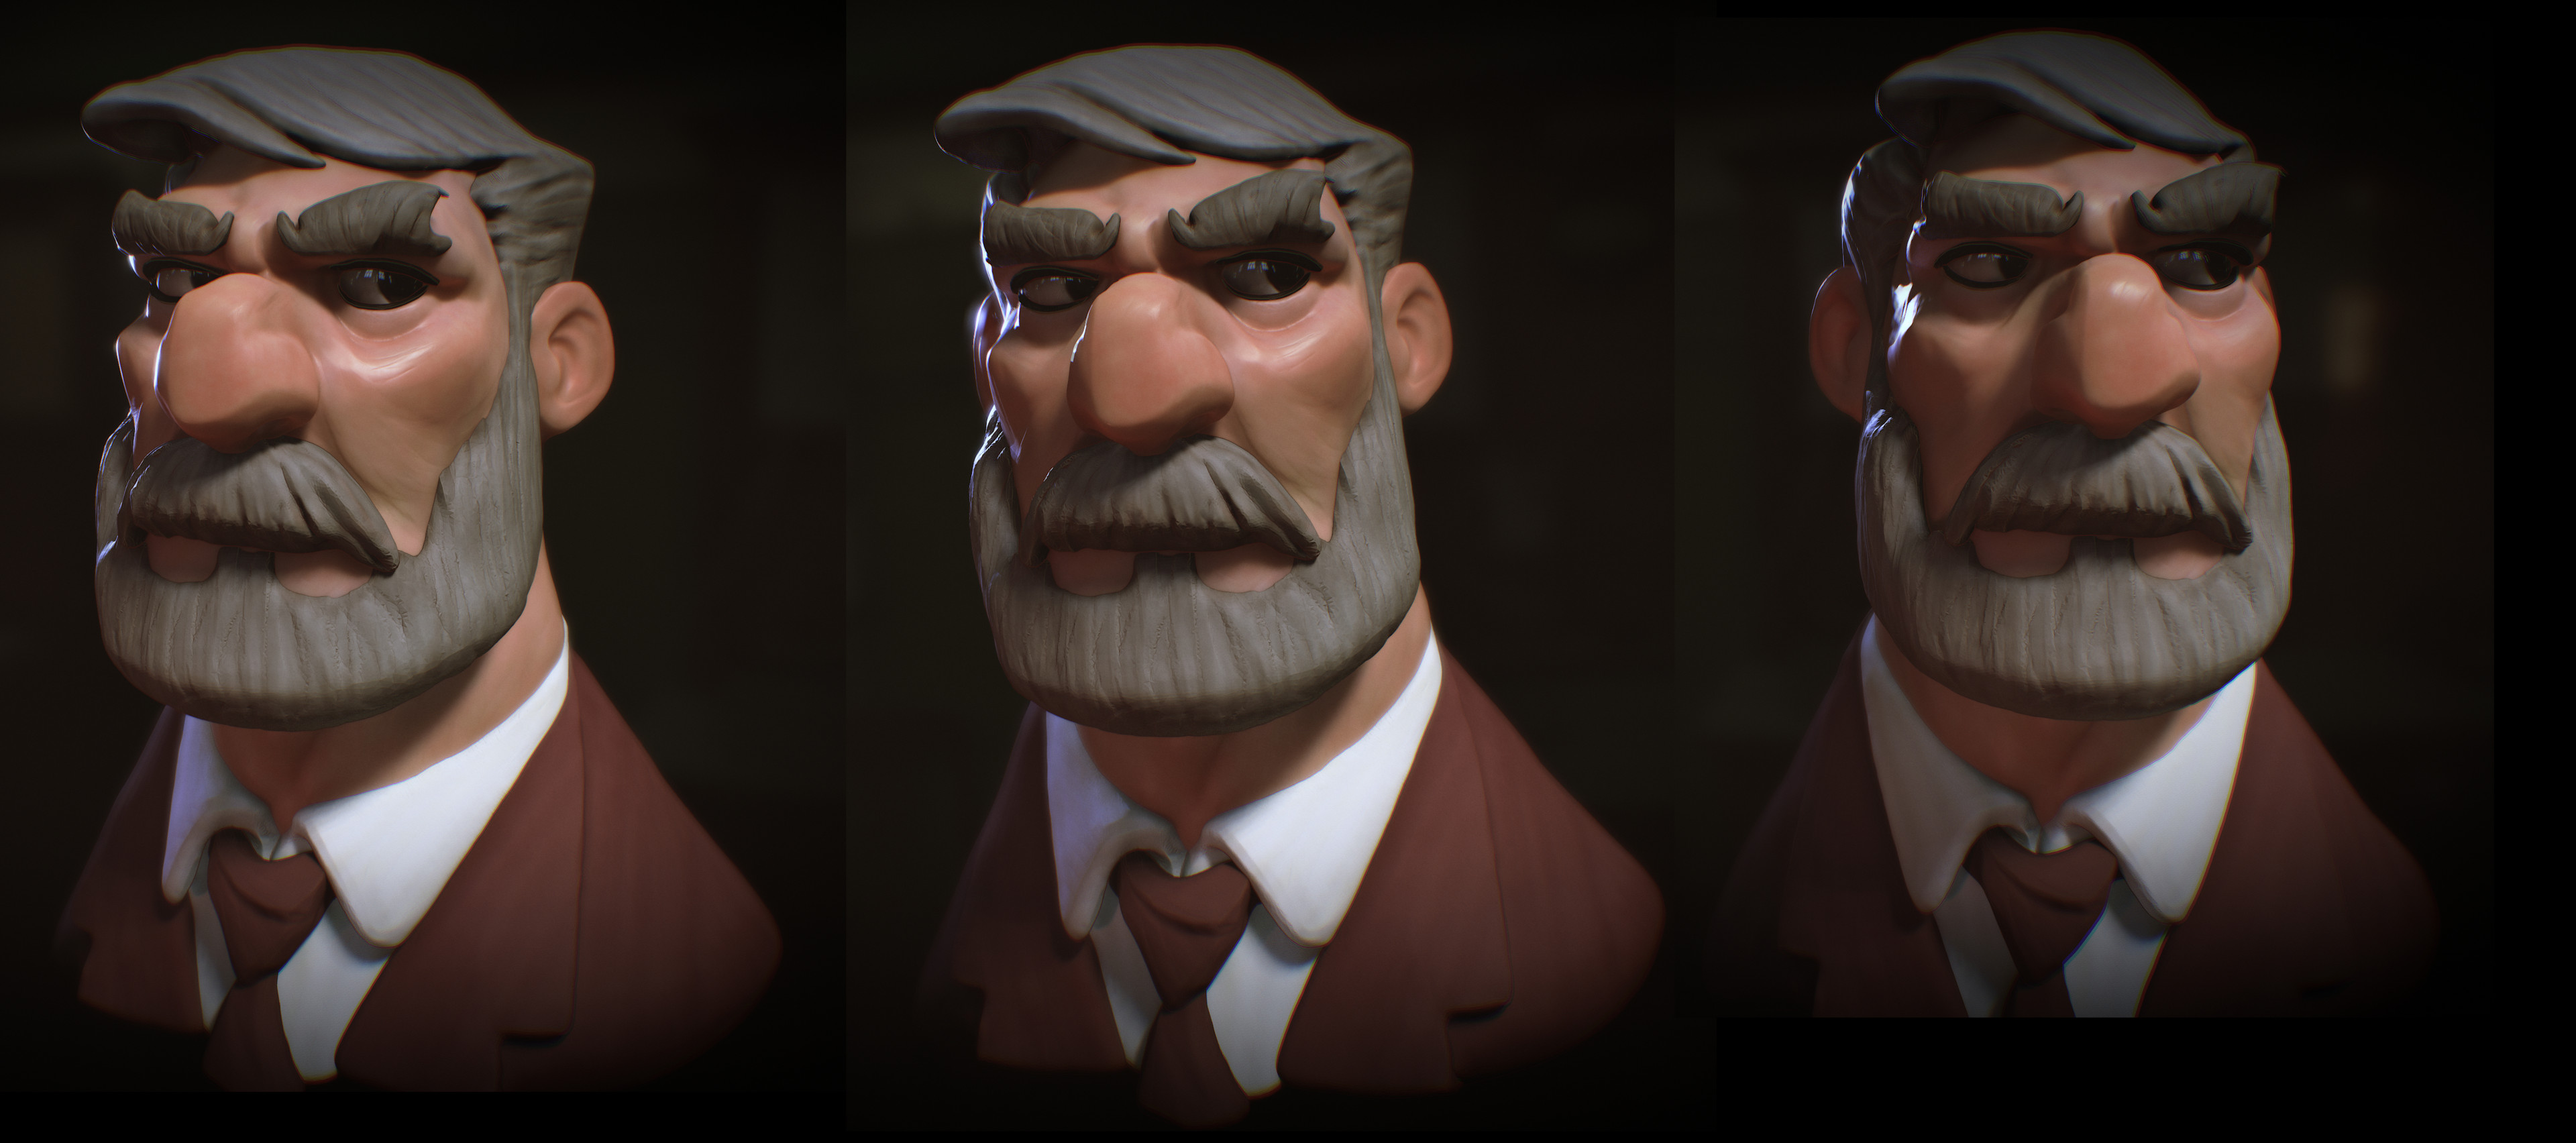 Unedited Renders from Nomad Sculpt